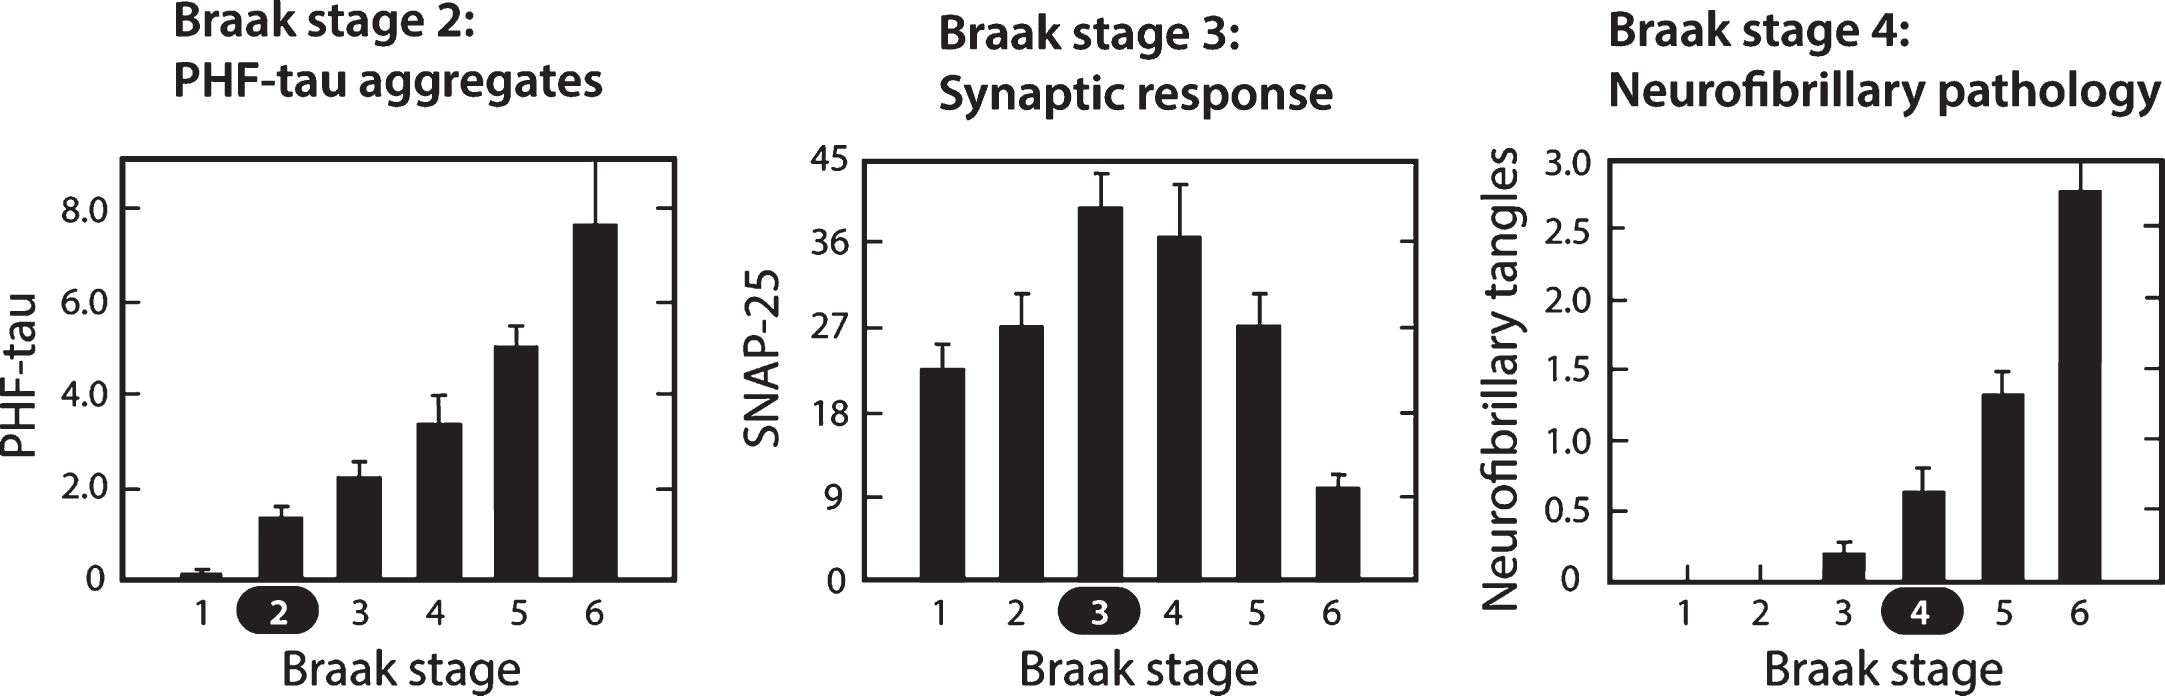 Molecular changes in neocortex by Braak staging. Proteolytically stable PHFs are present in neocortex from Braak stage 2 onwards (A); levels of SNAP-25 (as well as synaptophysin and syntaxin, not shown) increase significantly at Braak stage 3 and decline only after Braak stage 5 (B); significant numbers of neurofibrillary tangles are not observed until Braak stage 4 and beyond (C). Measures determined for frontal and temporal cortices. Source: Adapted from Mukaetova-Ladinska et al., Am J Pathol 157, 623-636, 2000, with permission of Elsevier.